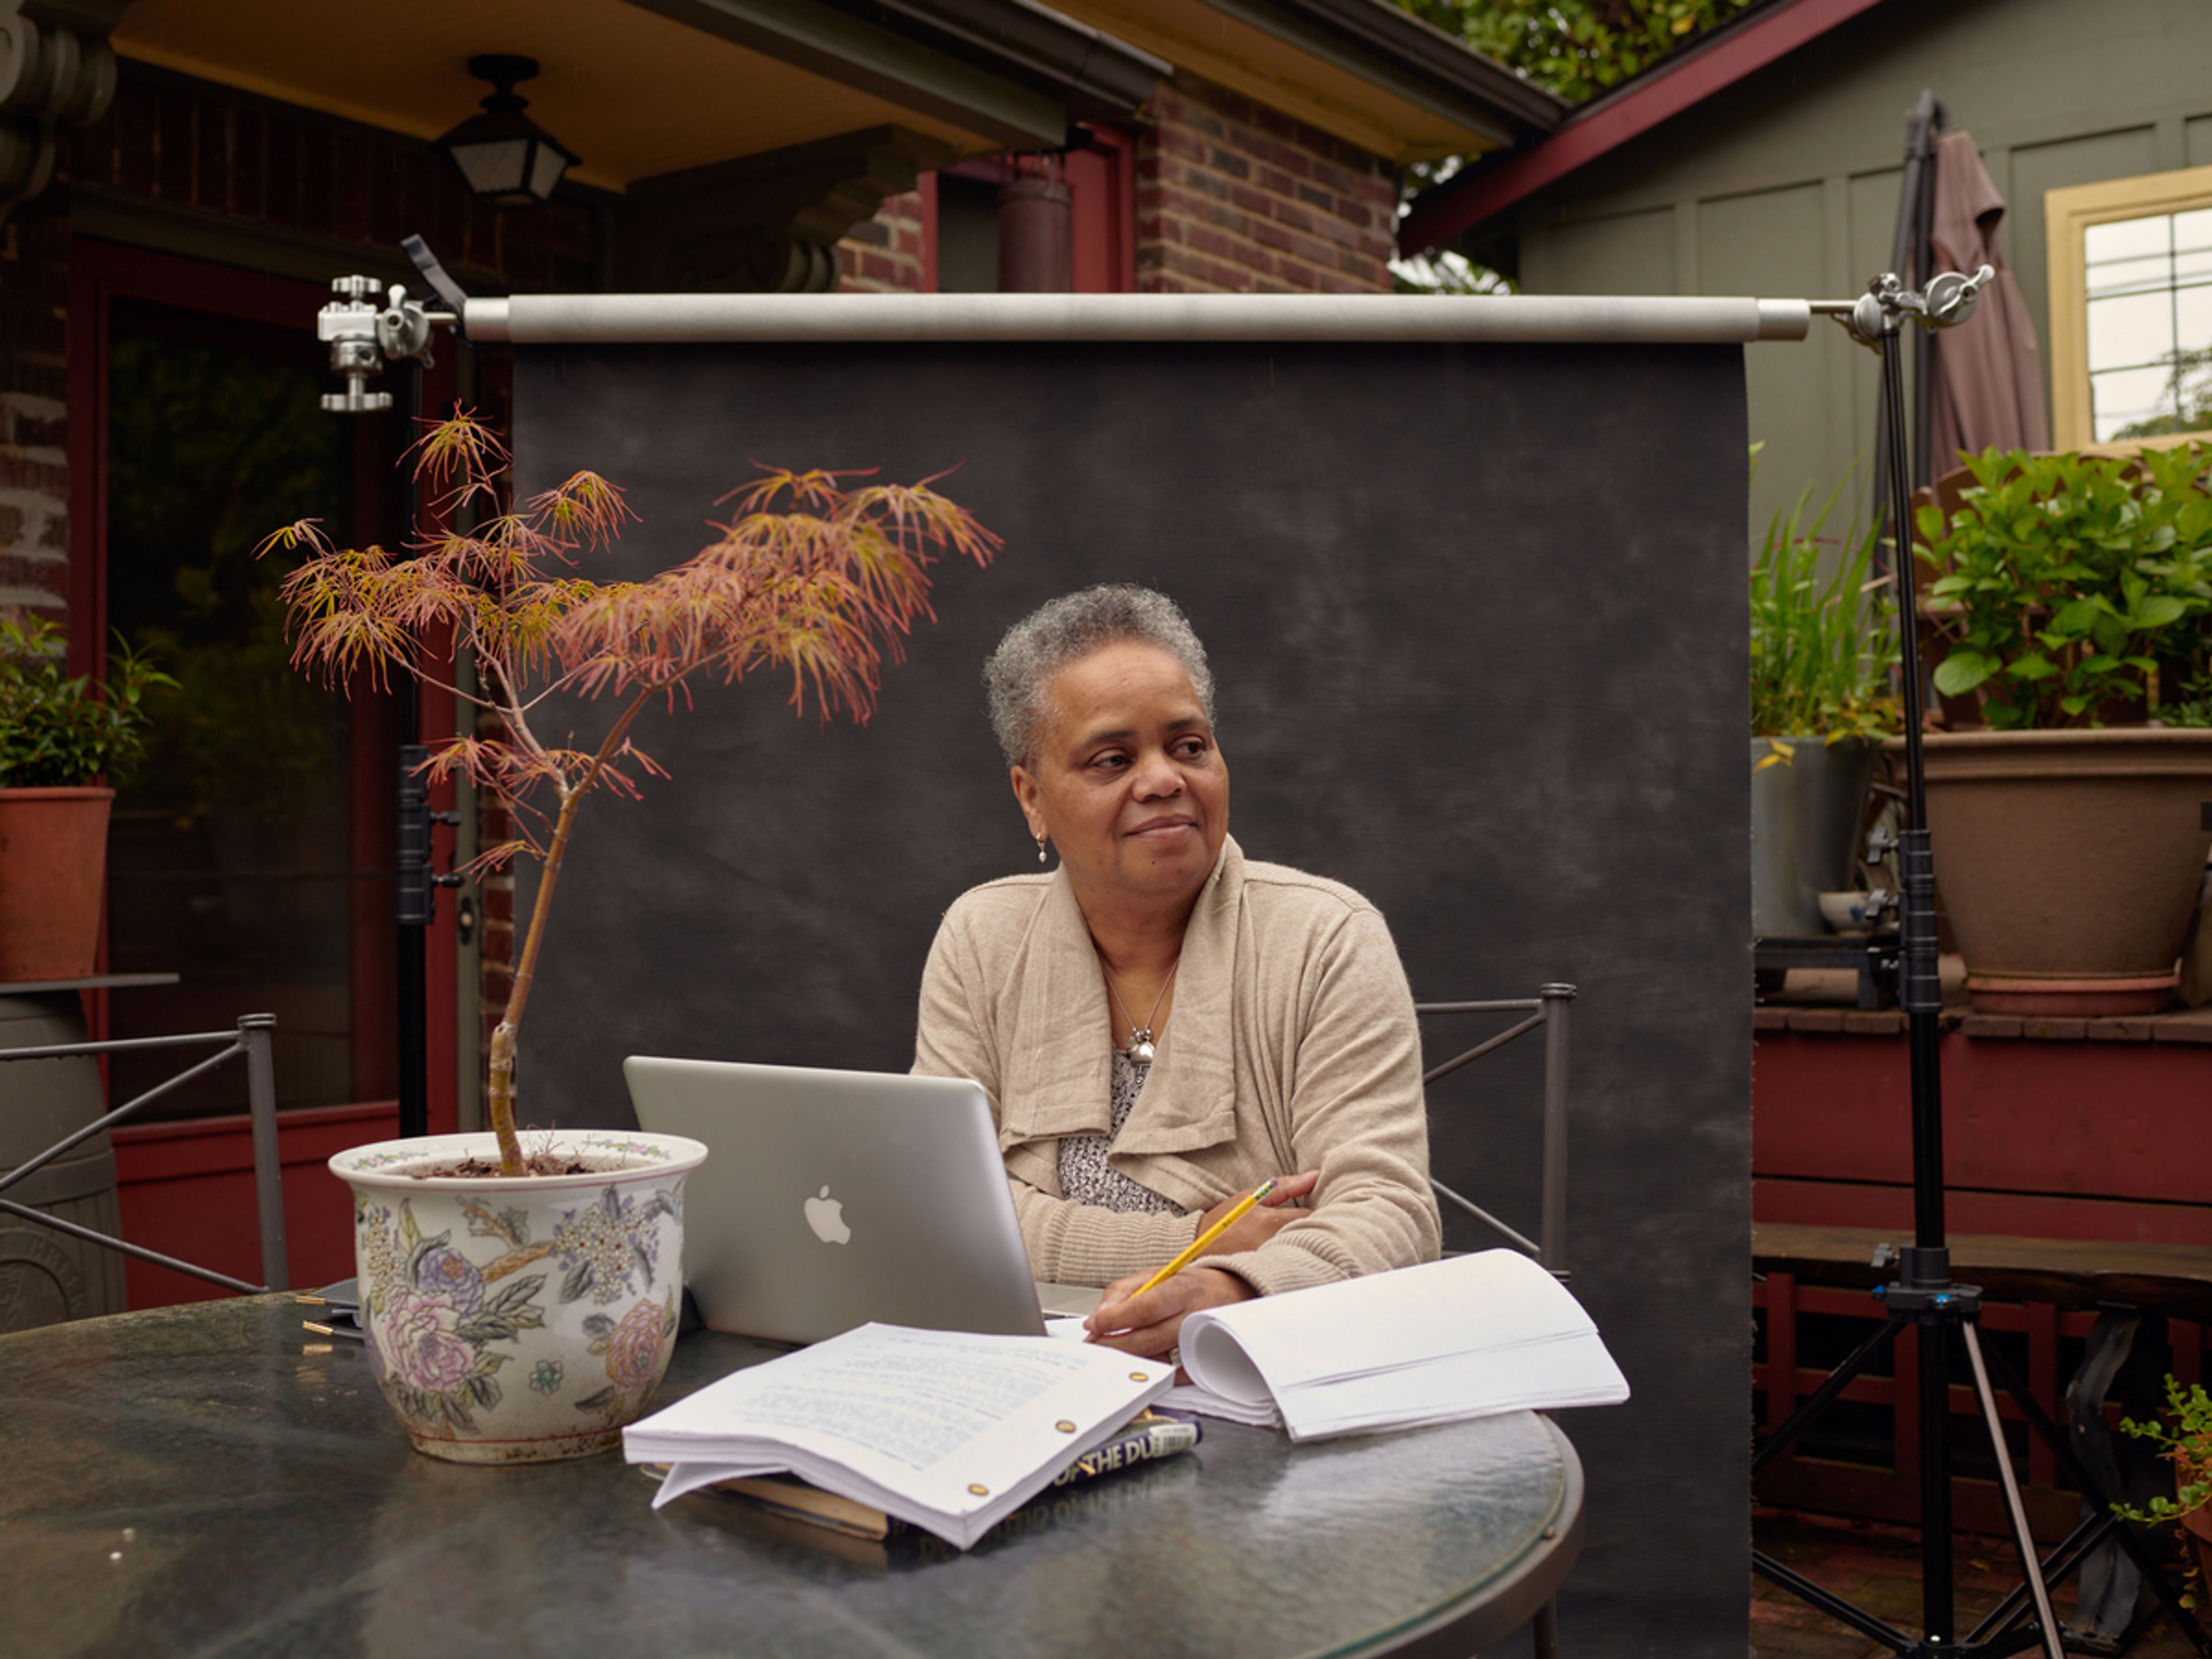 Person sits in front of a black screen in a house, at a round dark table featuring a plant, laptop and various papers. She is wearing a beige jacket and her hair is gray and short.